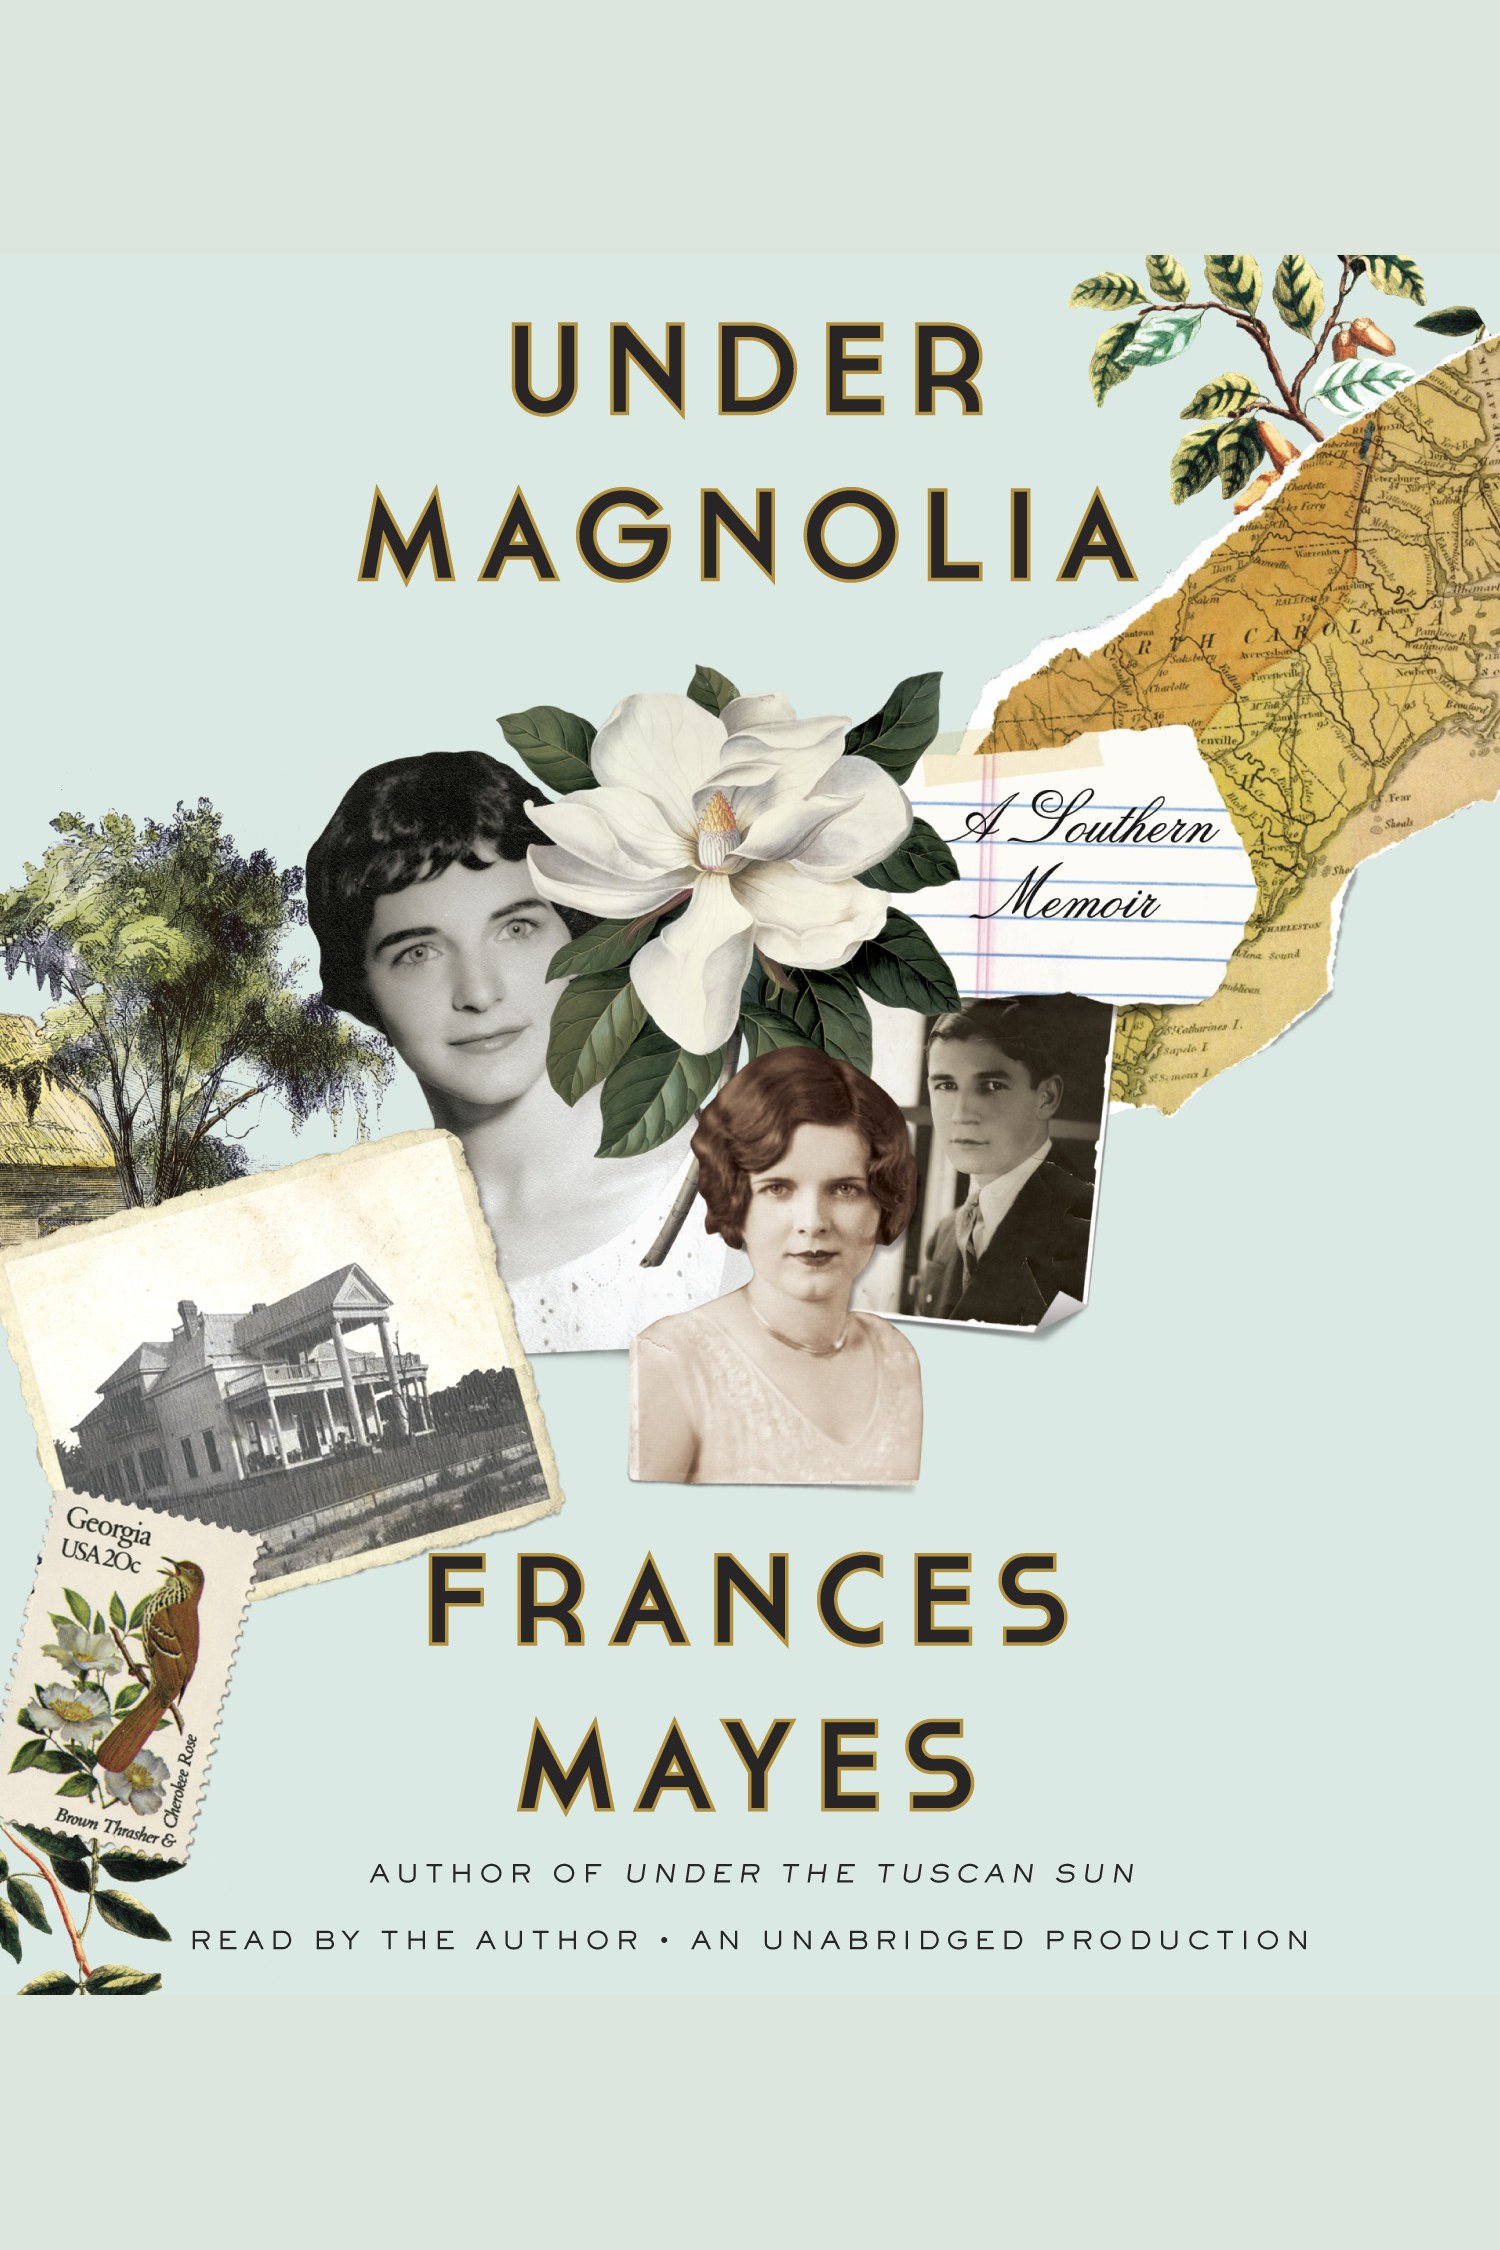 Under magnolia A southern memoir cover image